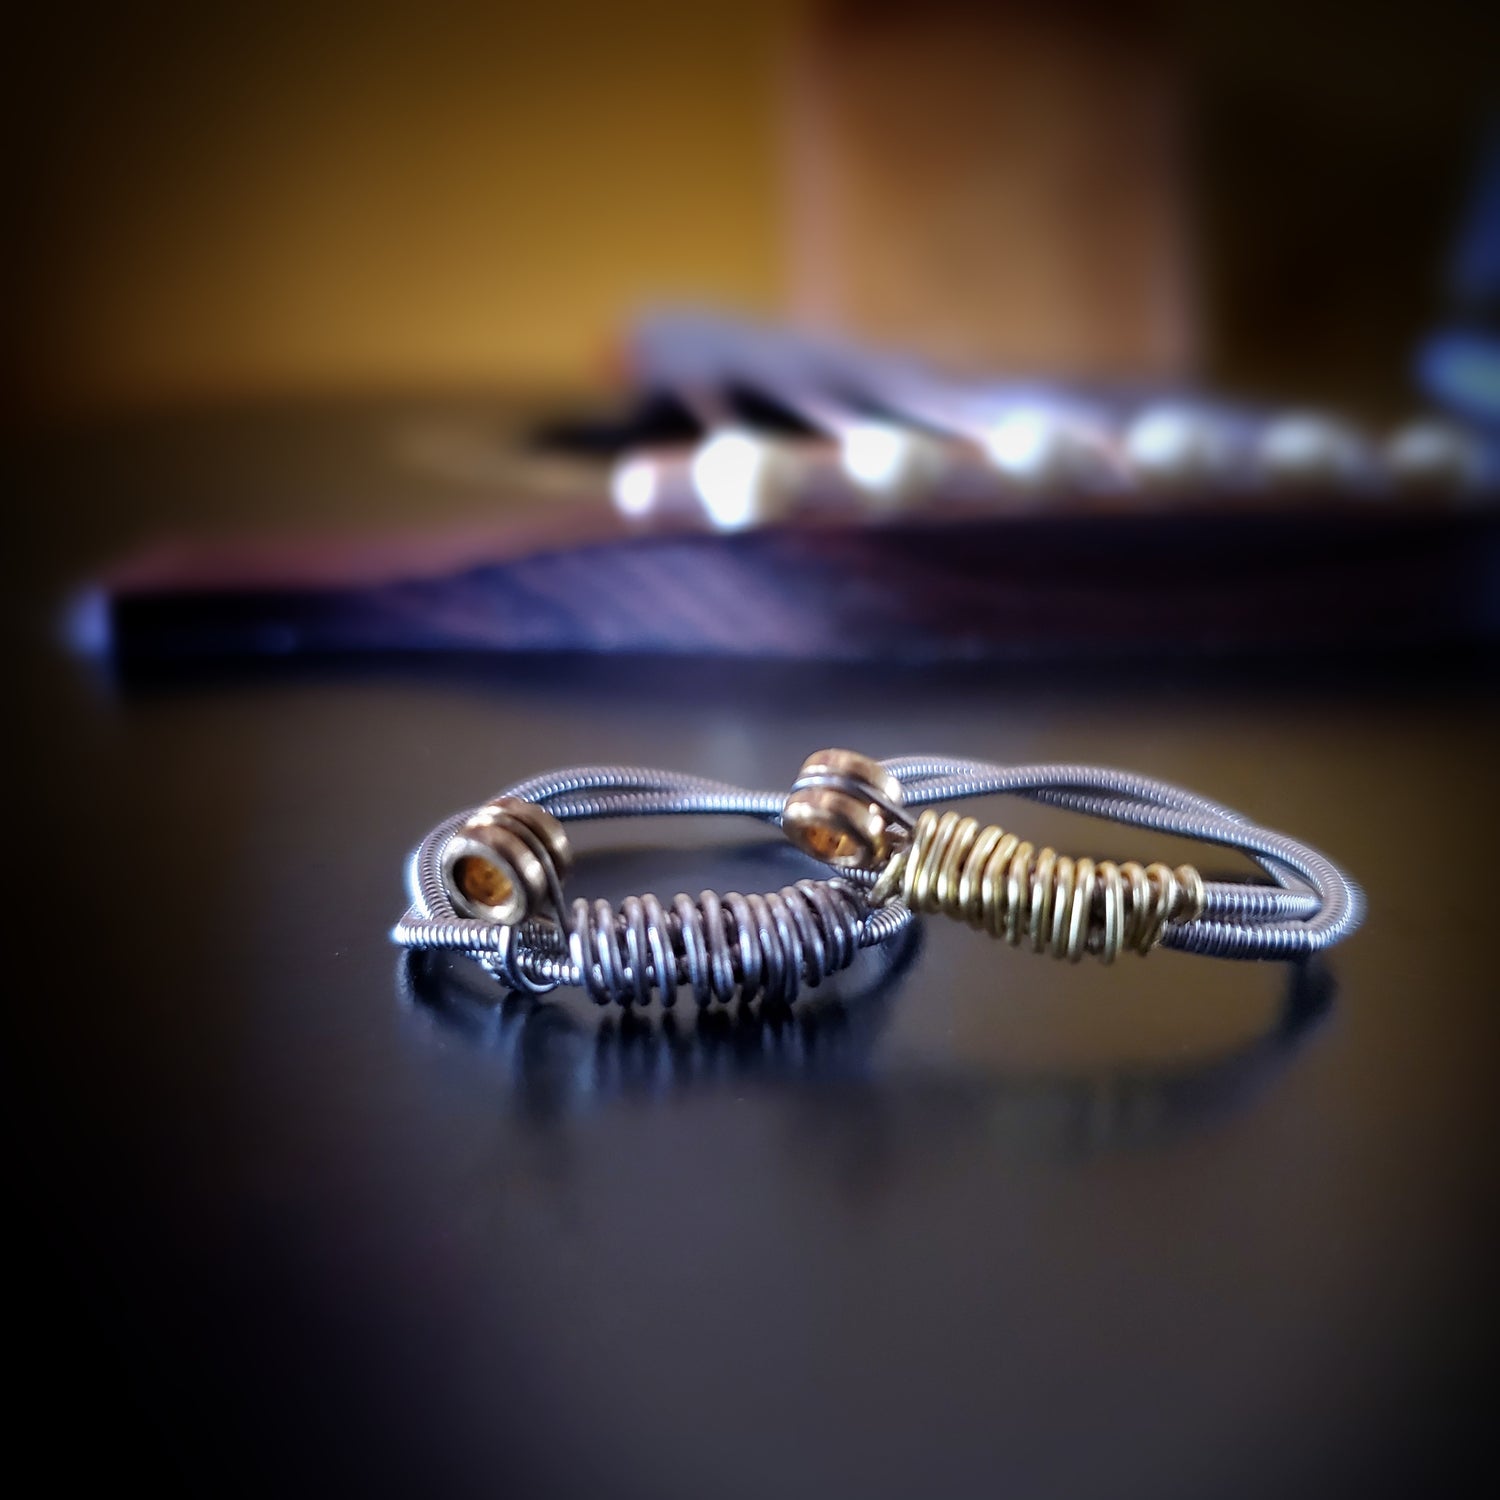 two rings are sitting on a black guitar - both are made from upcycled guitar strings, both are silver but the left one has silver coloured wire and the right one has gold coloured wire